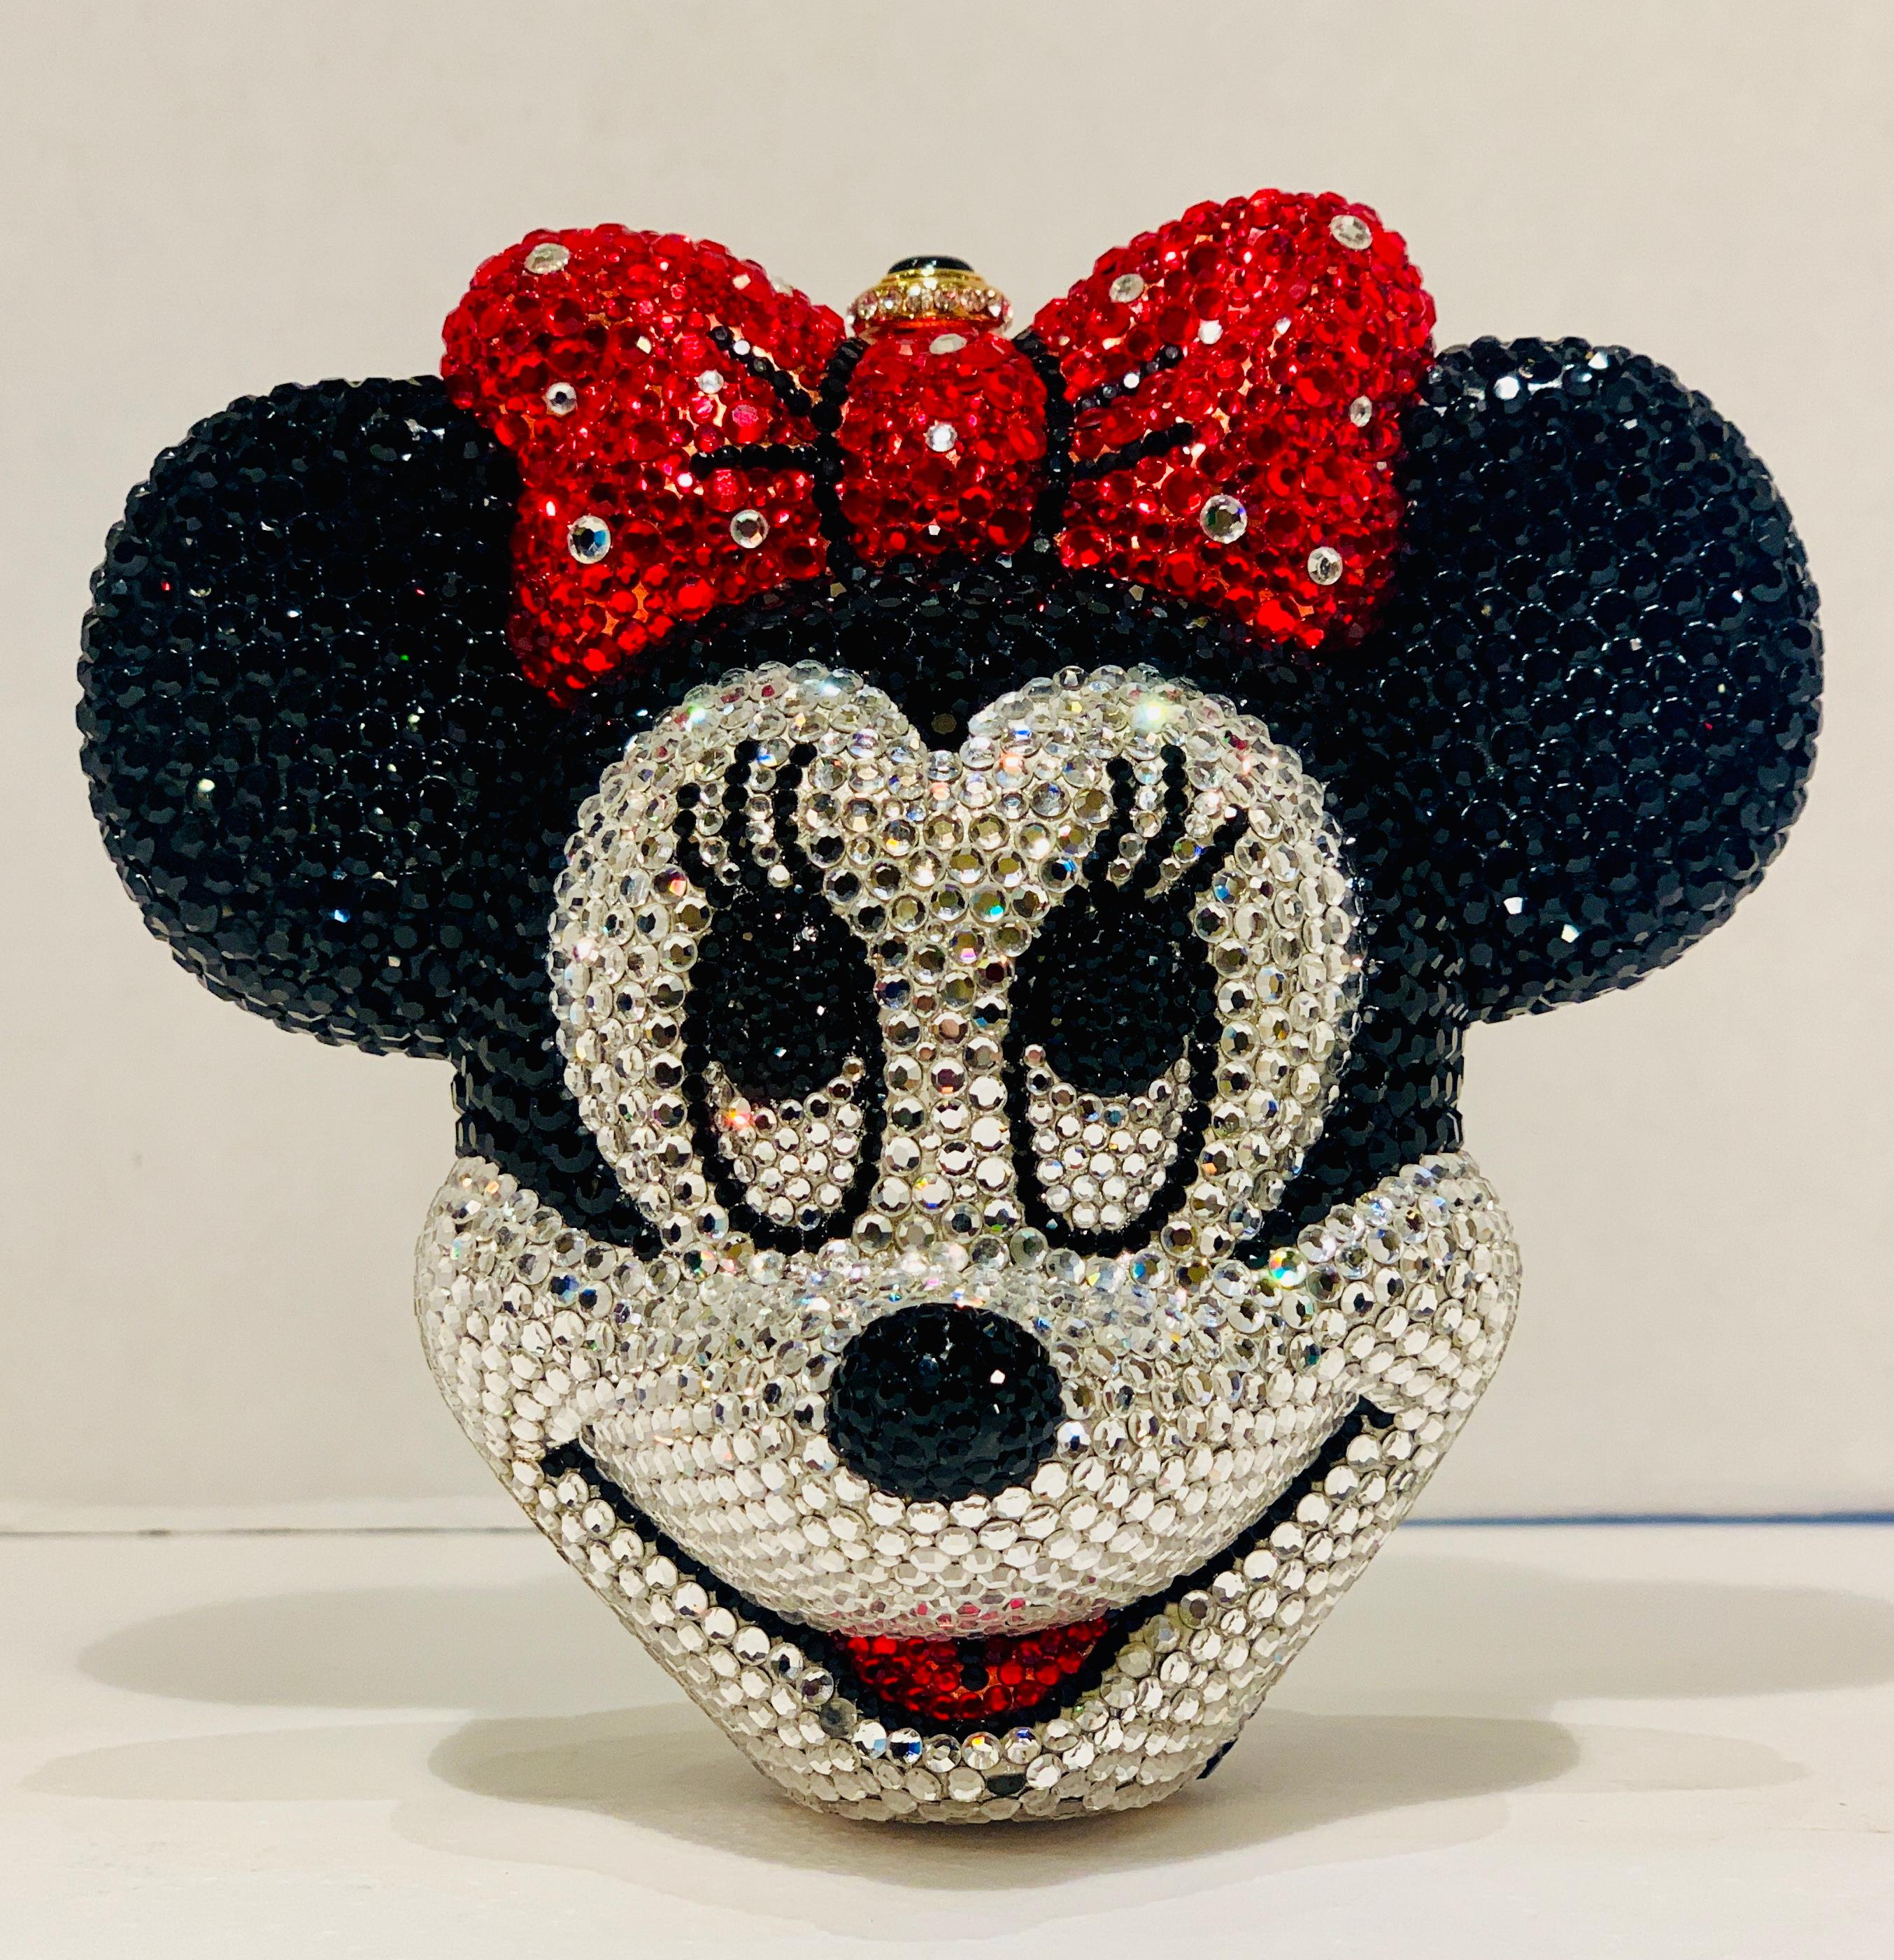 An exquisite, handmade, Swarovski crystal encrusted, gold-plated metal Disney (Trademarked) Minnie Mouse head shaped minaudière evening bag purse by Kathrine Baumann, who is the celebrated handbag maker to the stars. 

Features a silver metal rope